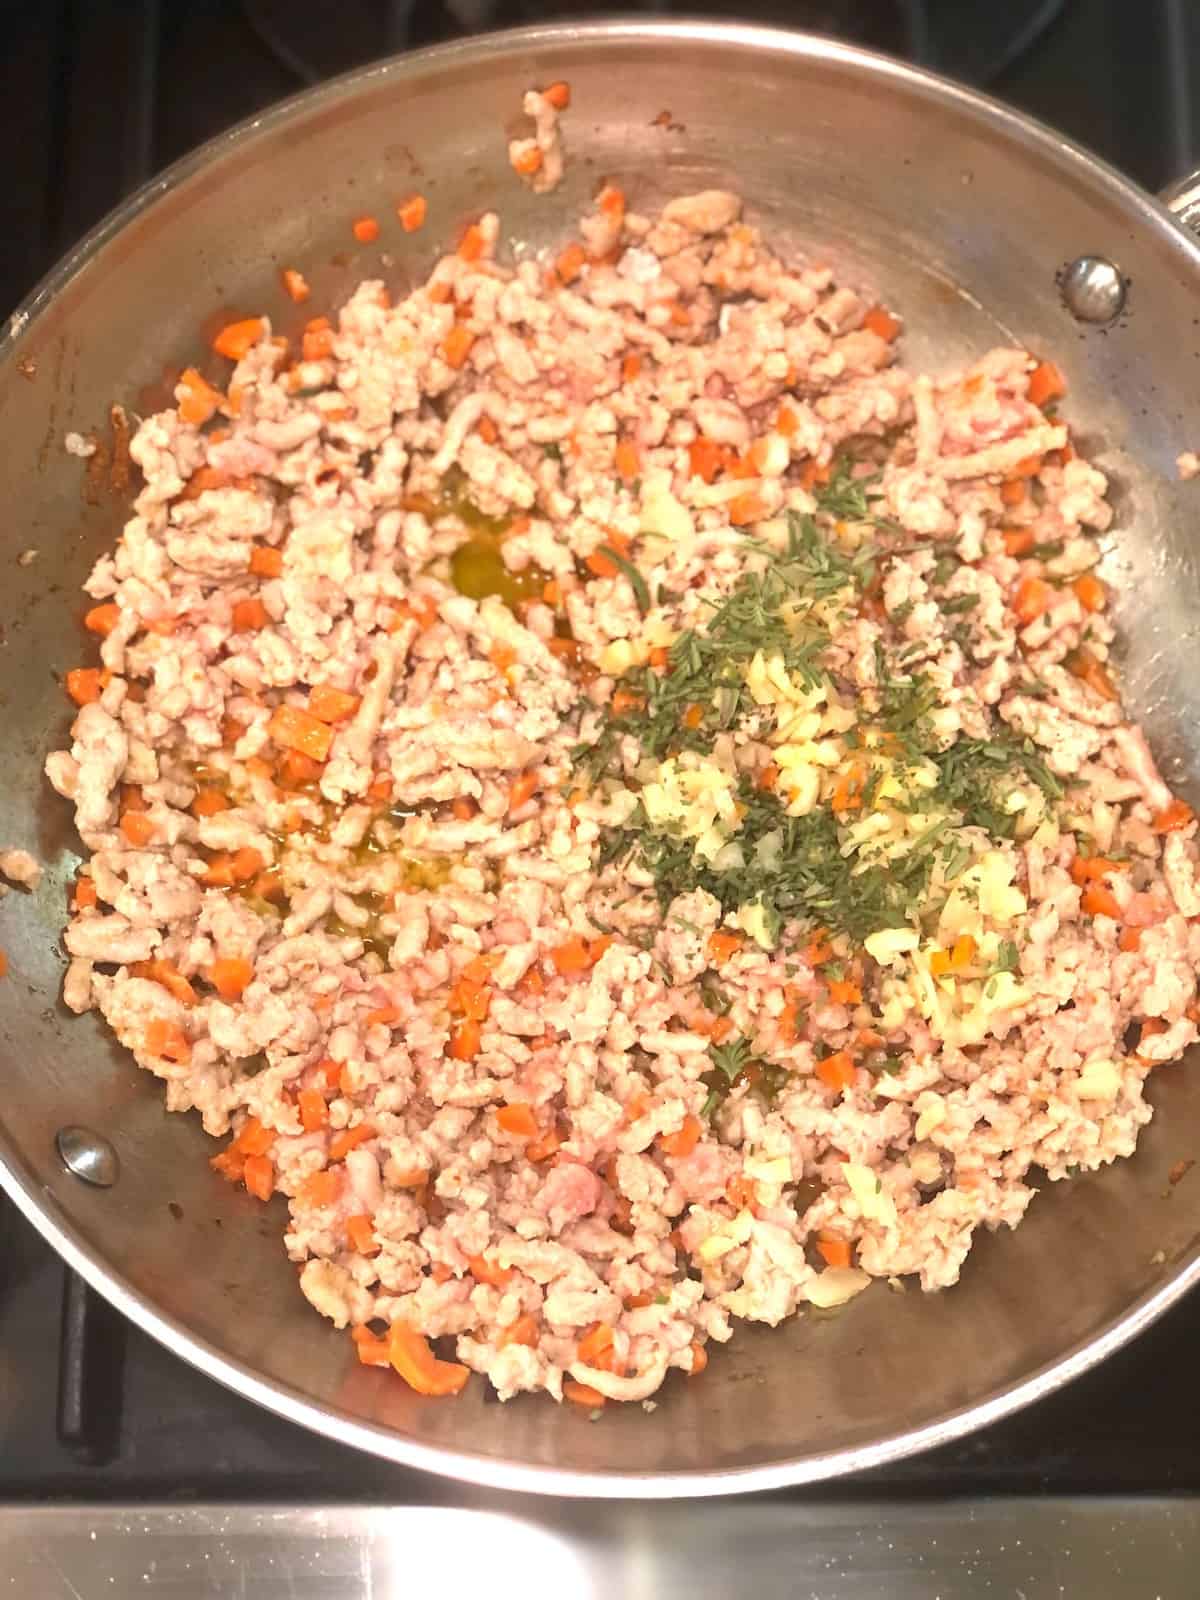 cooking ground pork in a pan